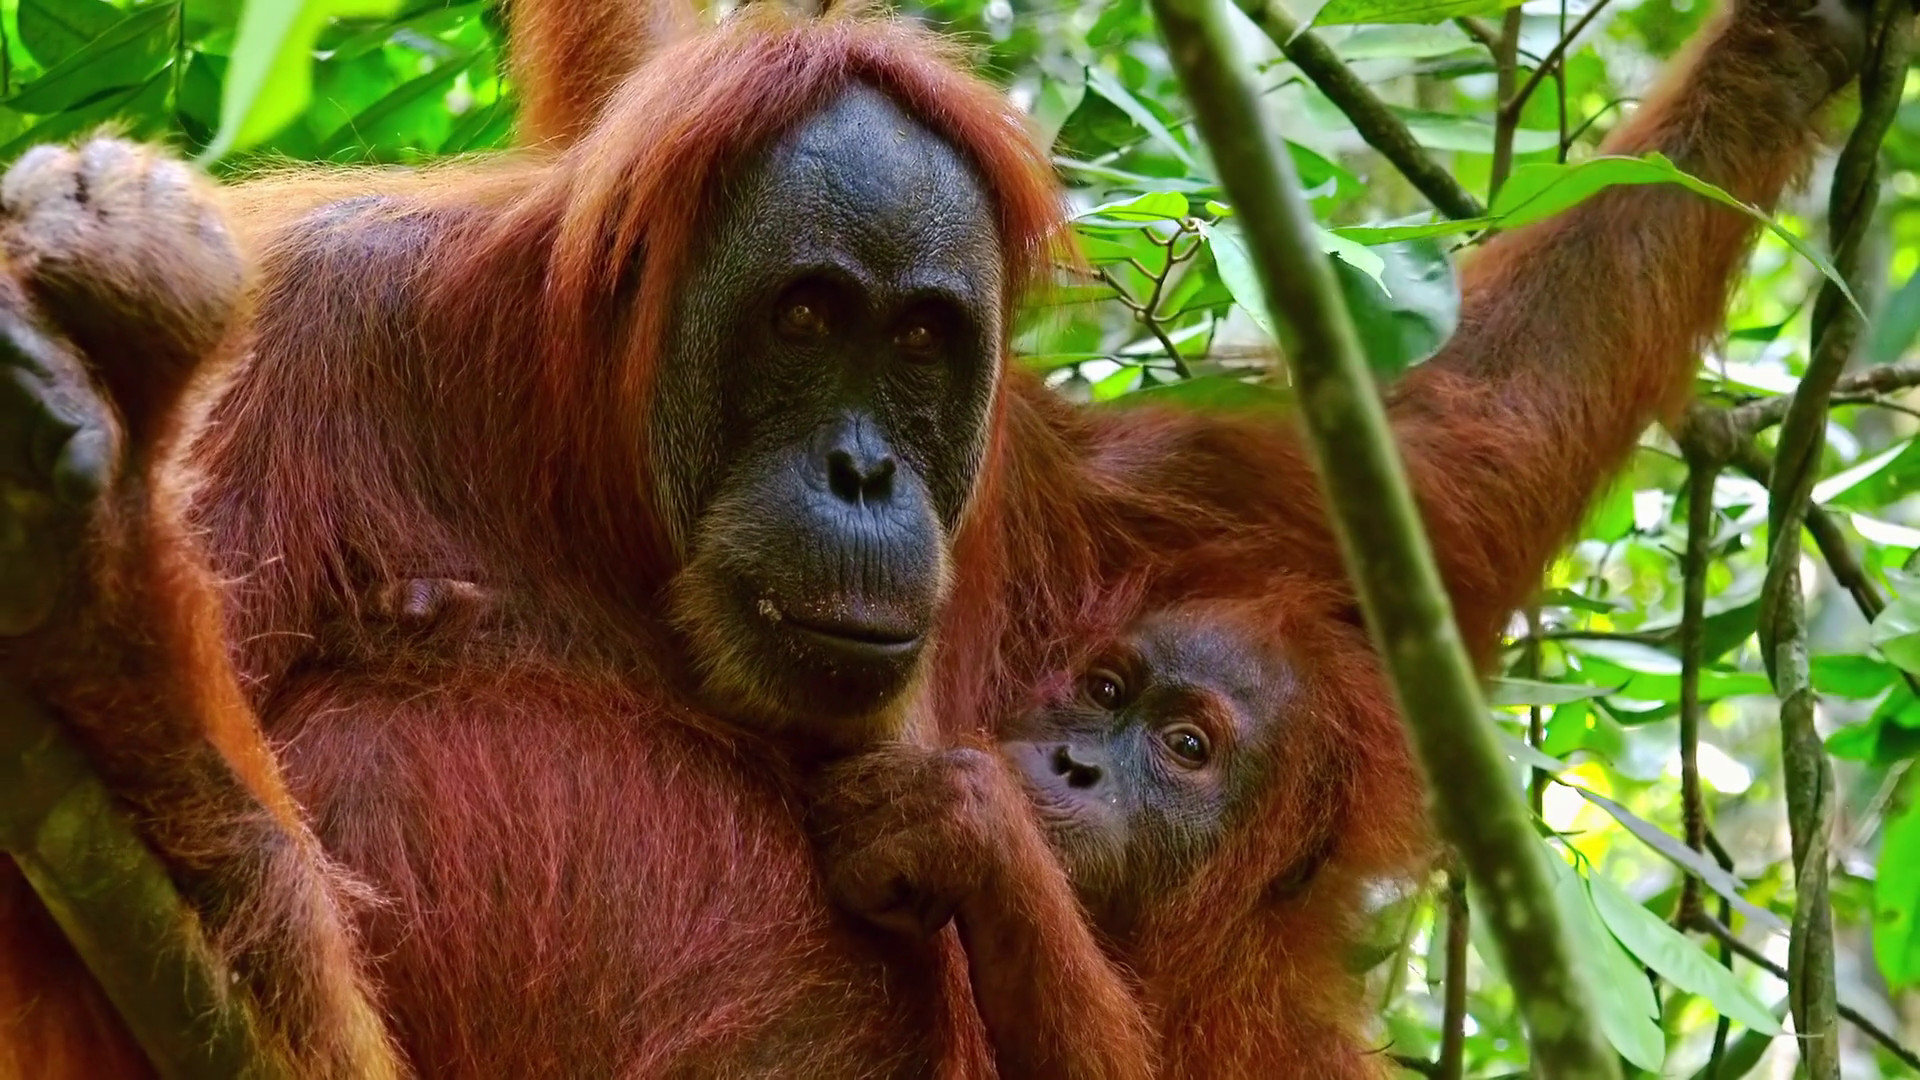 1920x1080 Cute baby orangutan sucking mother's milk. Pair of great apes sitting on  tree branch surrounded by green foliage. Lovely jungle inhabitants.